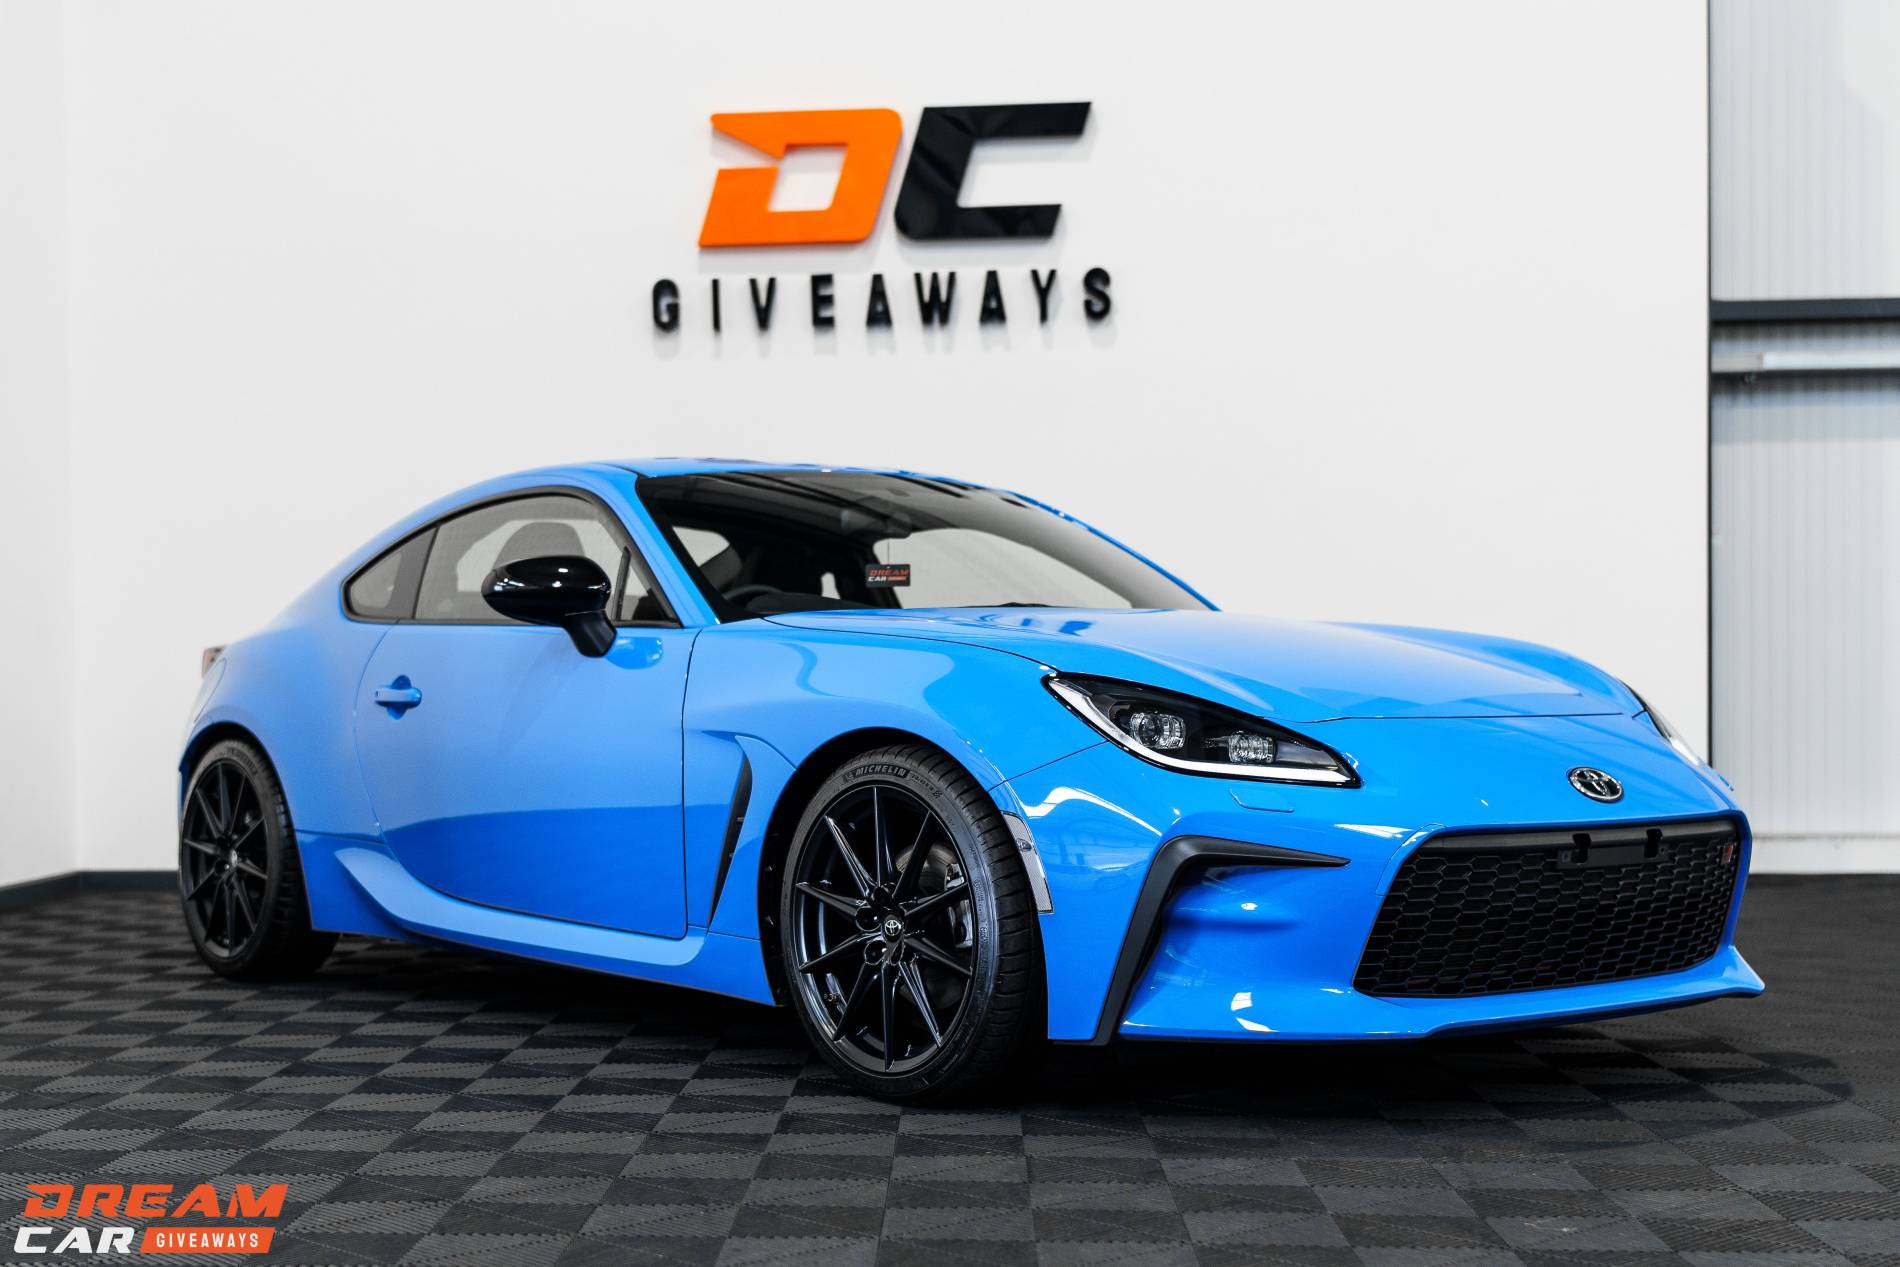 Win this 2023 Toyota GR86 & £1,000 or £24,000 Tax Free